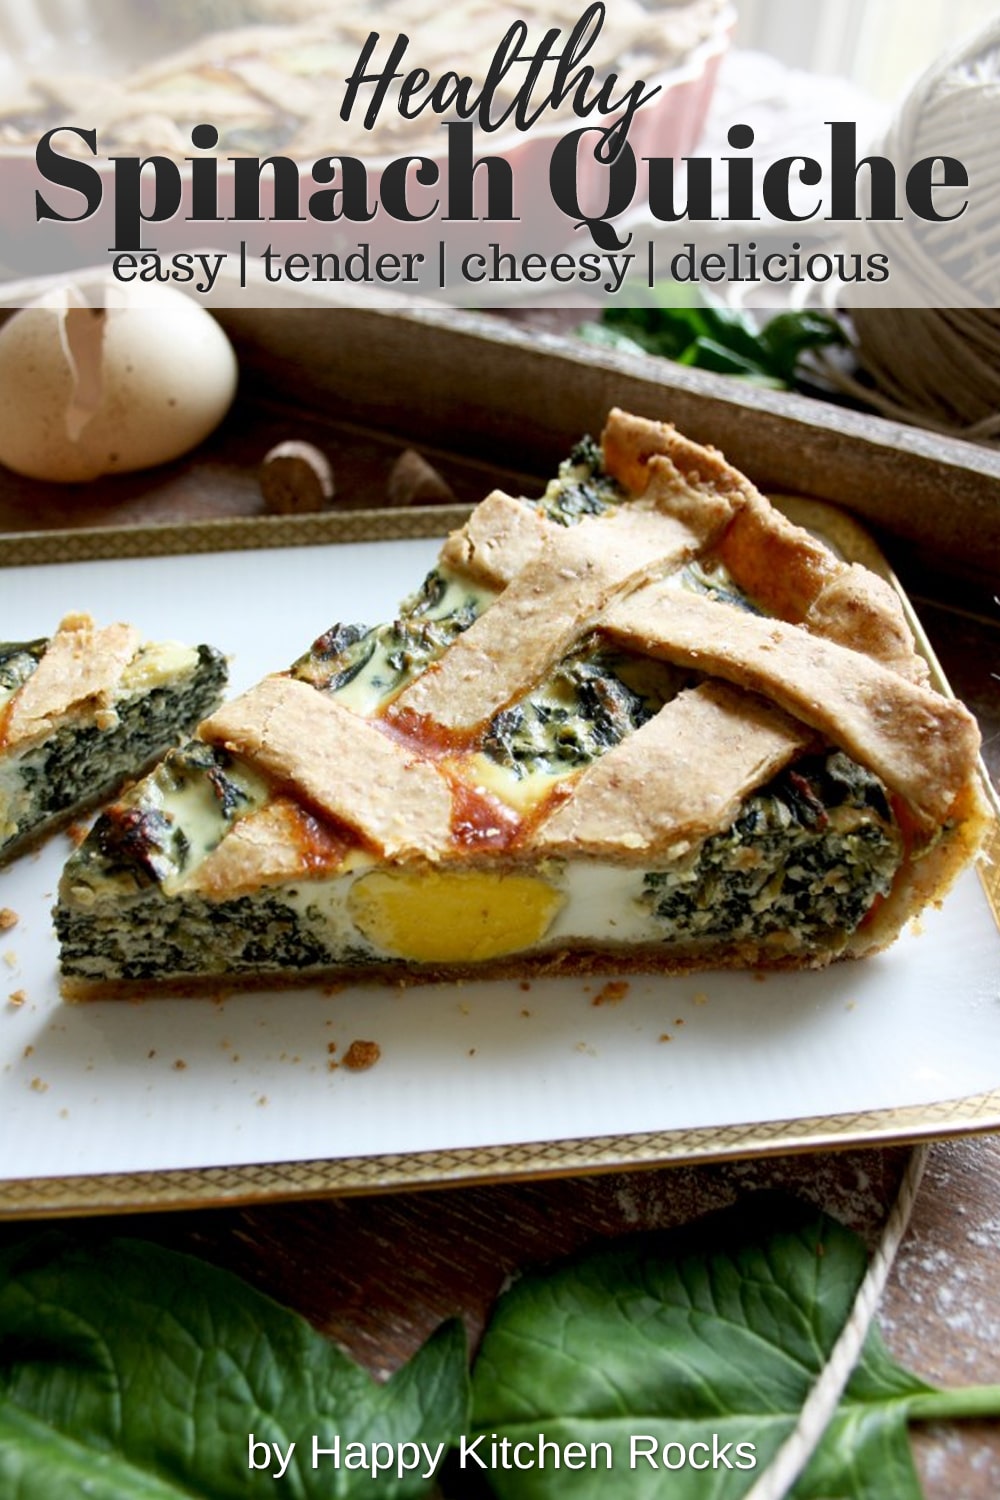 The Best Rustic Ricotta Spinach Quiche Collage with Text Overlay